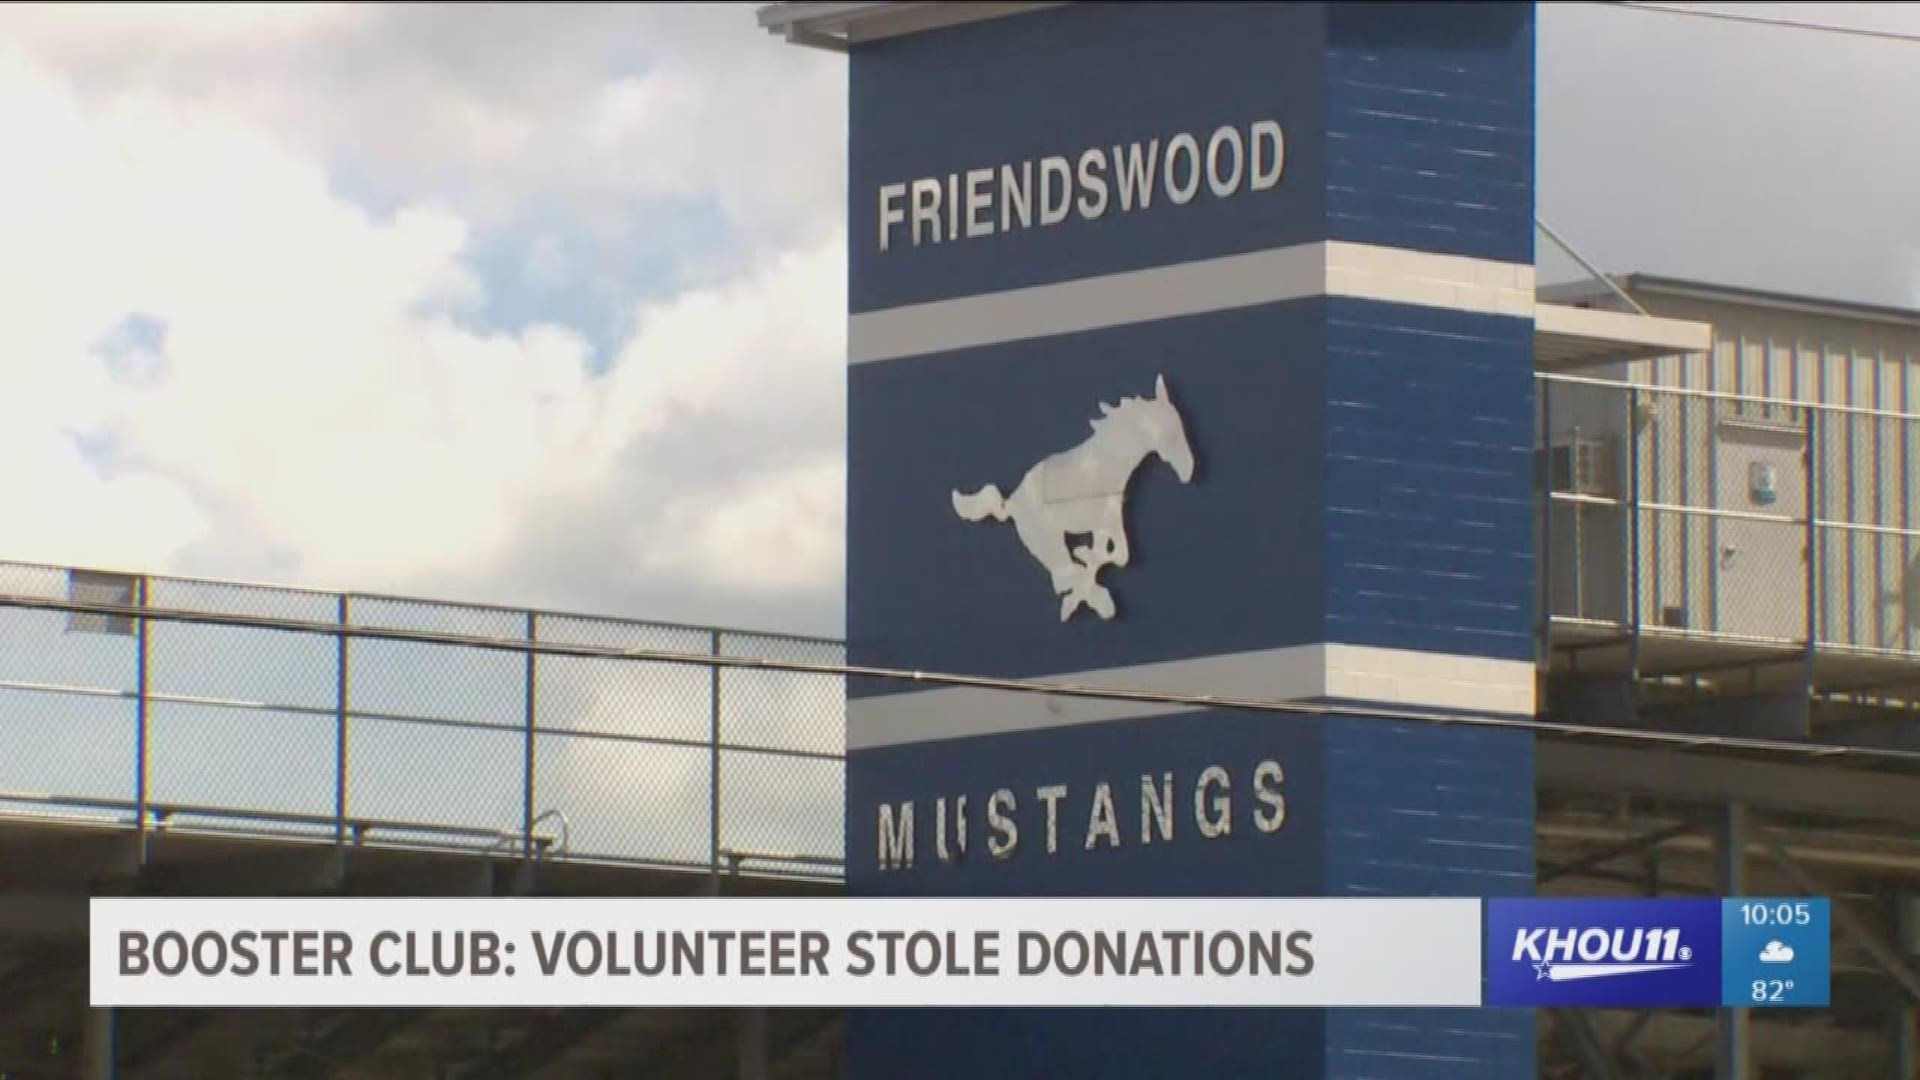 Friendswood High School boosters say their kids got ripped off by a parent. A person who volunteered to help find athletic sponsors and raise money for sports allegedly stole some of the money. 